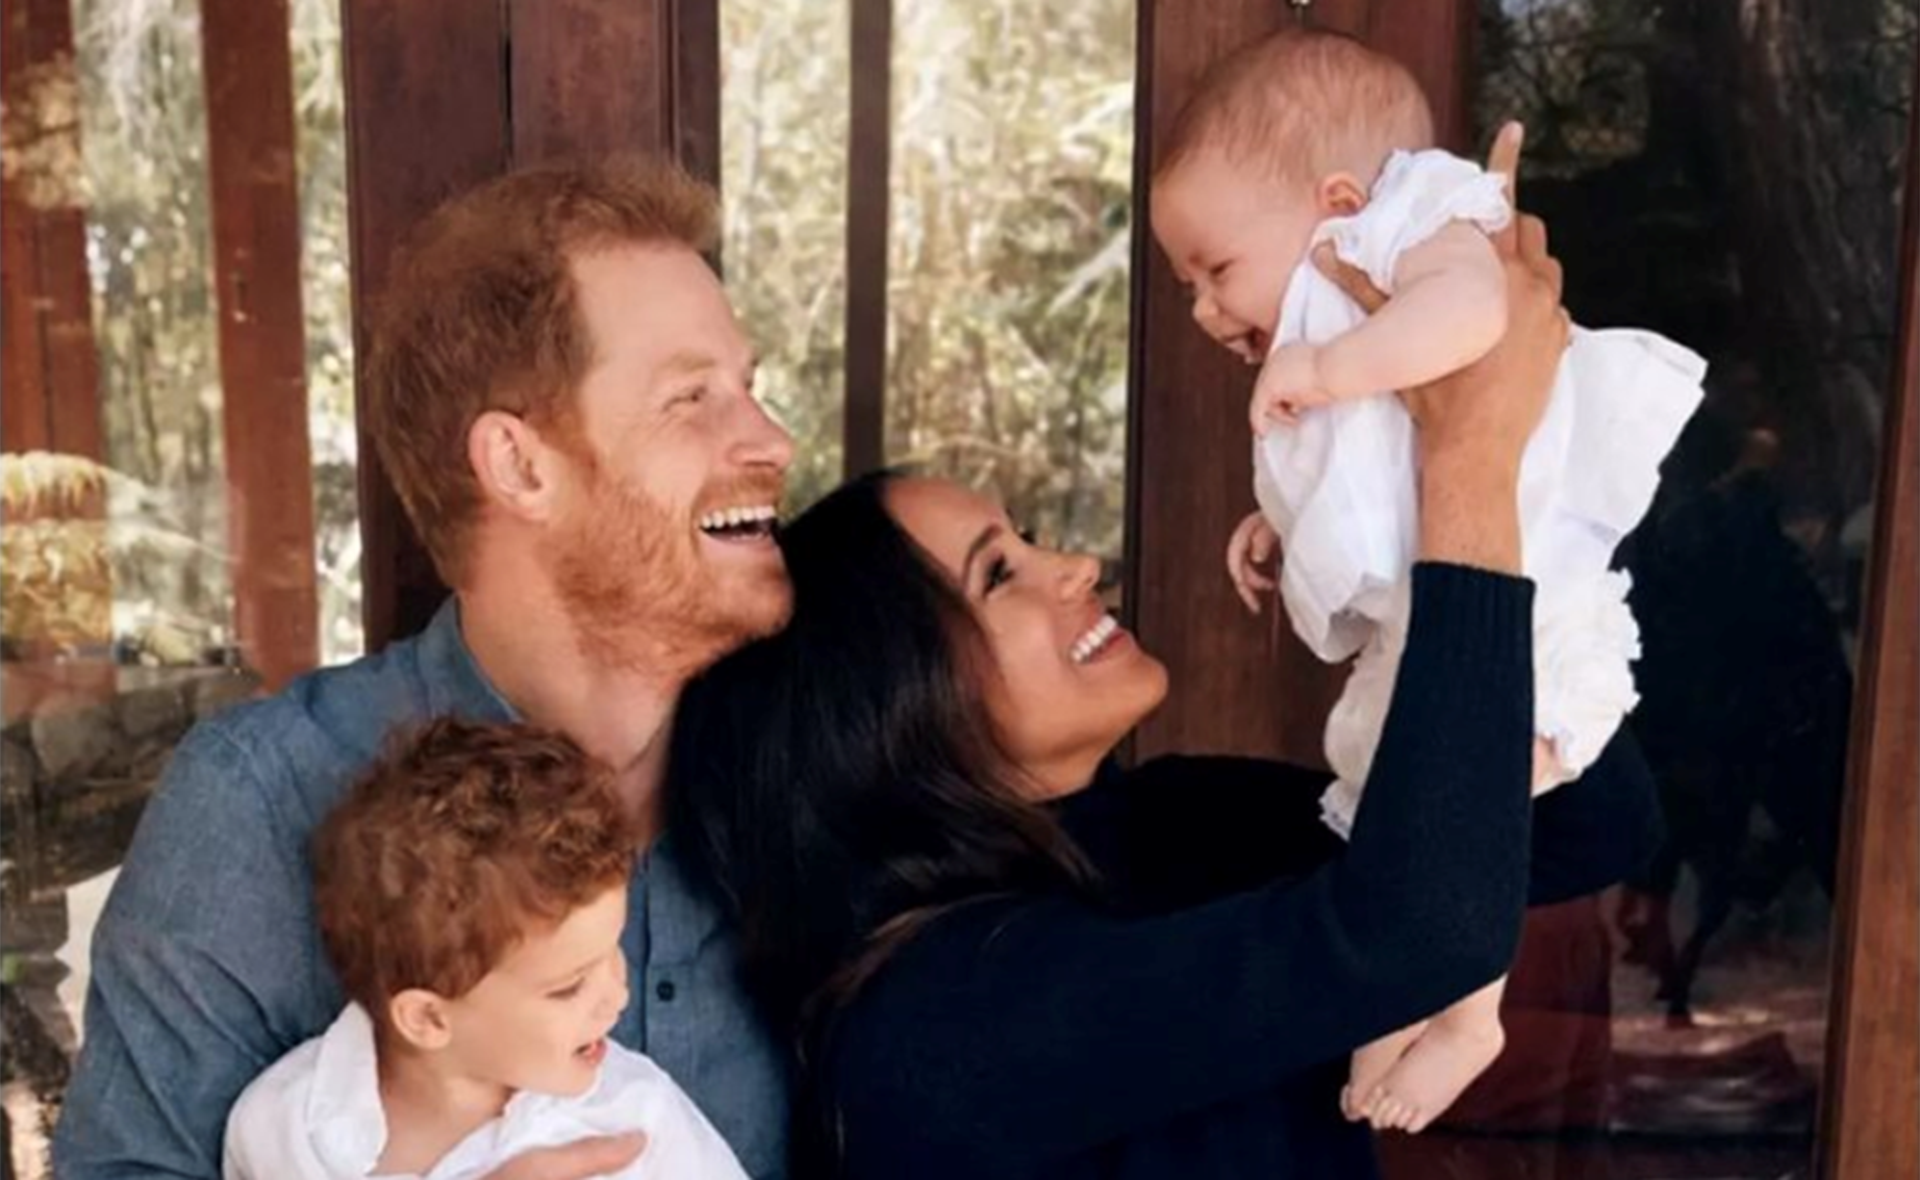 Prince Harry and Meghan Markle’s children become Prince Archie and Princess Lilibet in the wake of the Queen’s passing